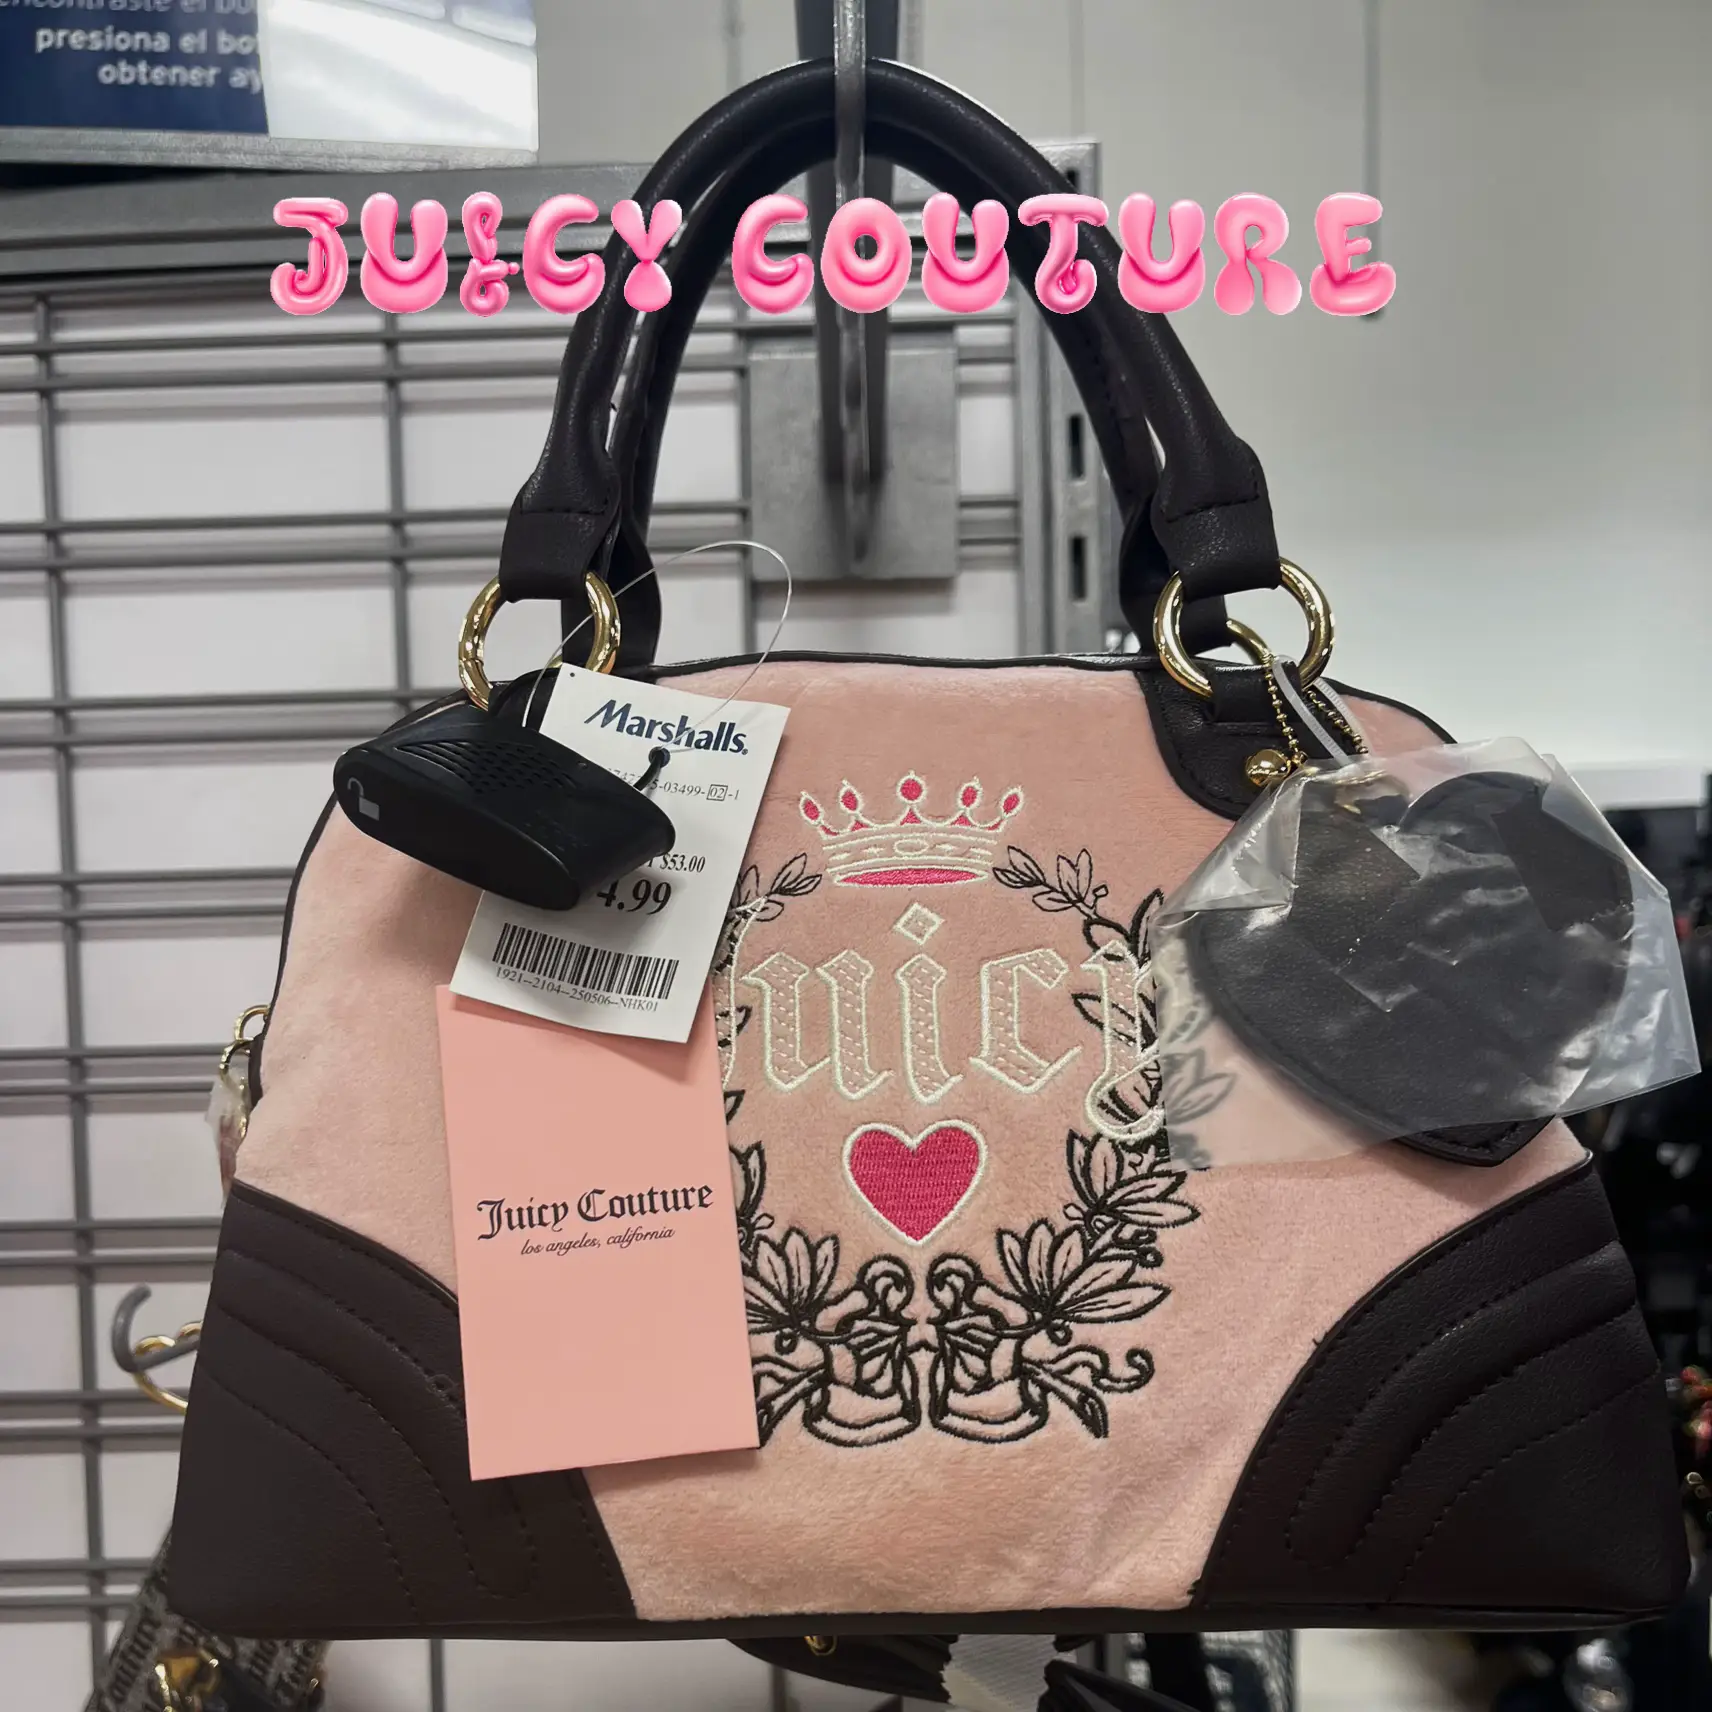 my favorite juicy couture find 😍